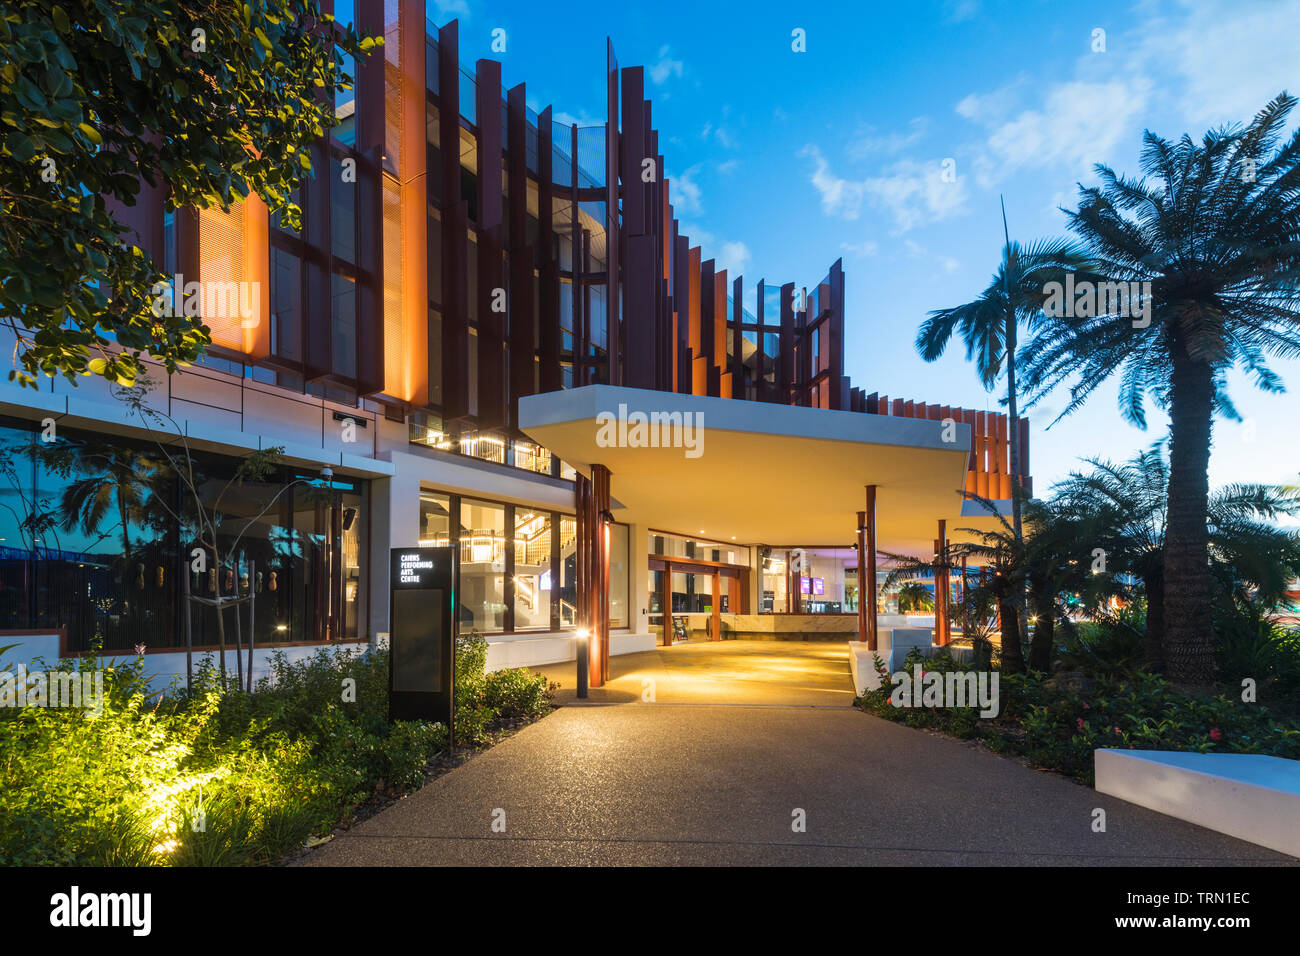 Entry to the Cairns Performing Arts Centre illuminated at twilight, Cairns, Queensland, Australia Stock Photo